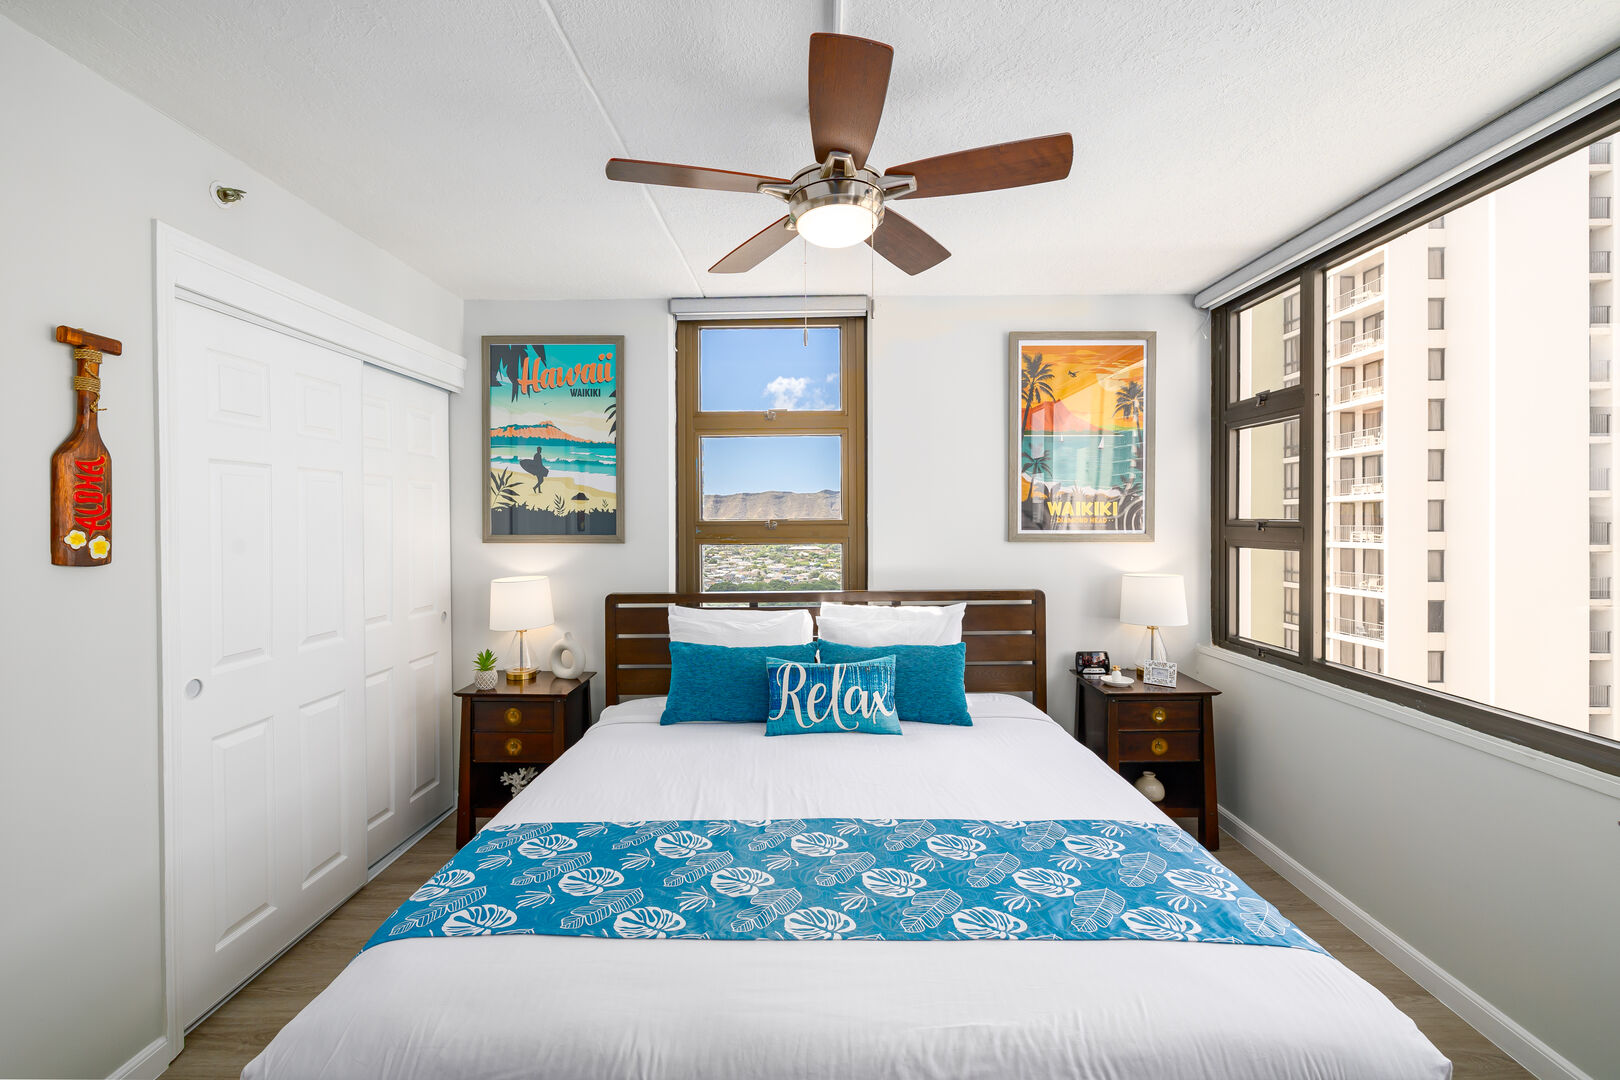 Bedroom with king size bed, ceiling fan and Ocean views